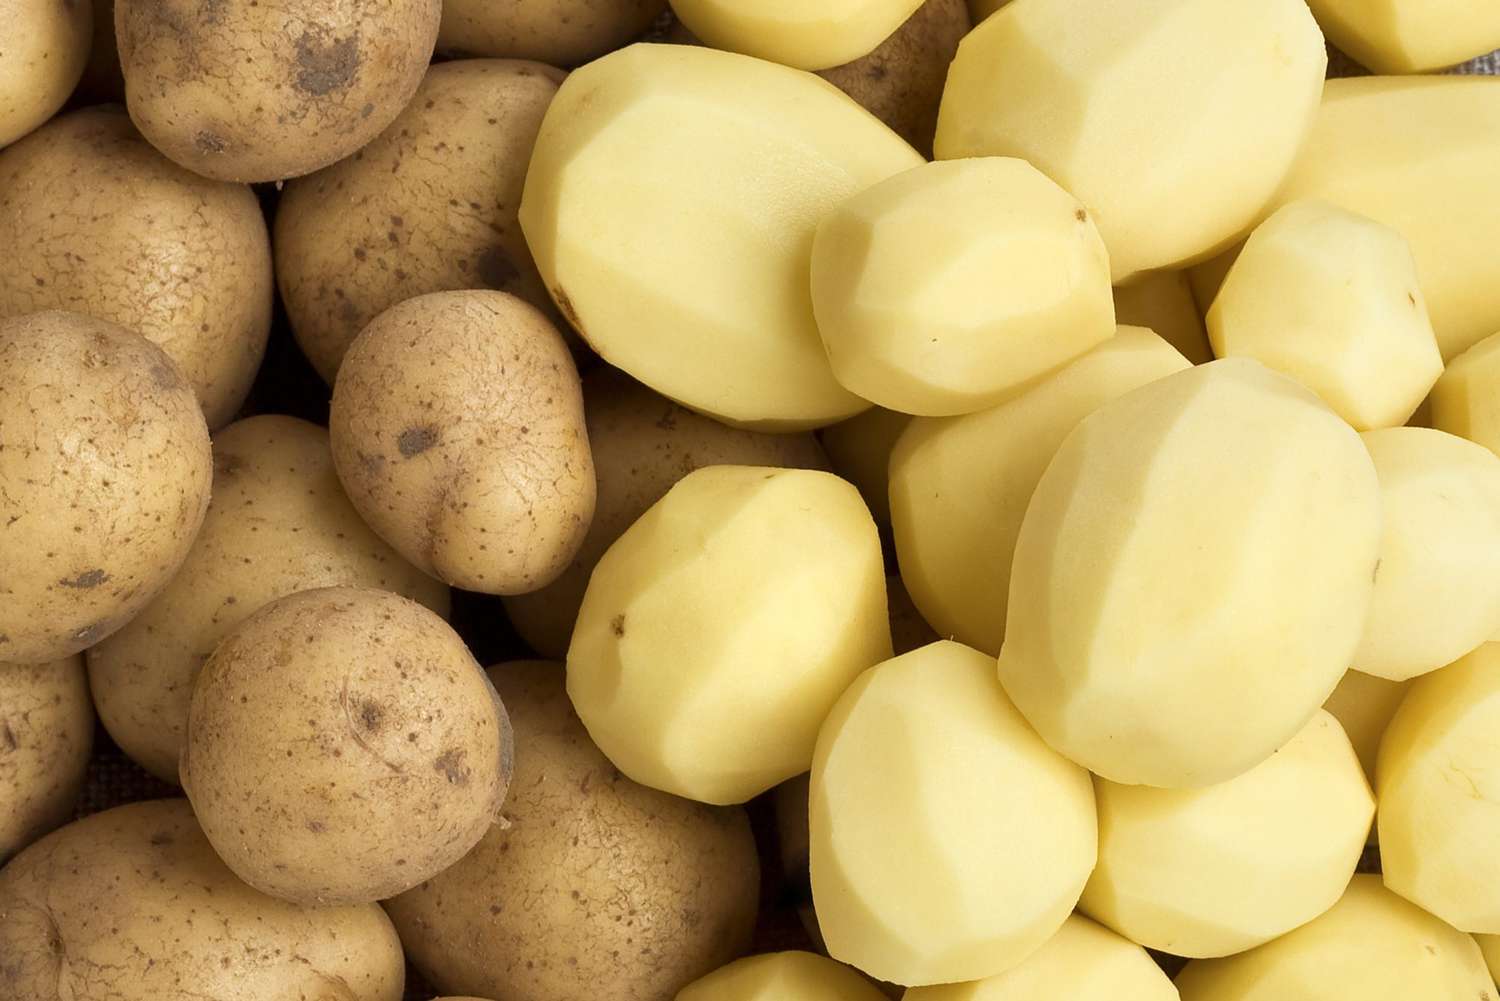 Can You Eat Raw Potatoes? | Allrecipes